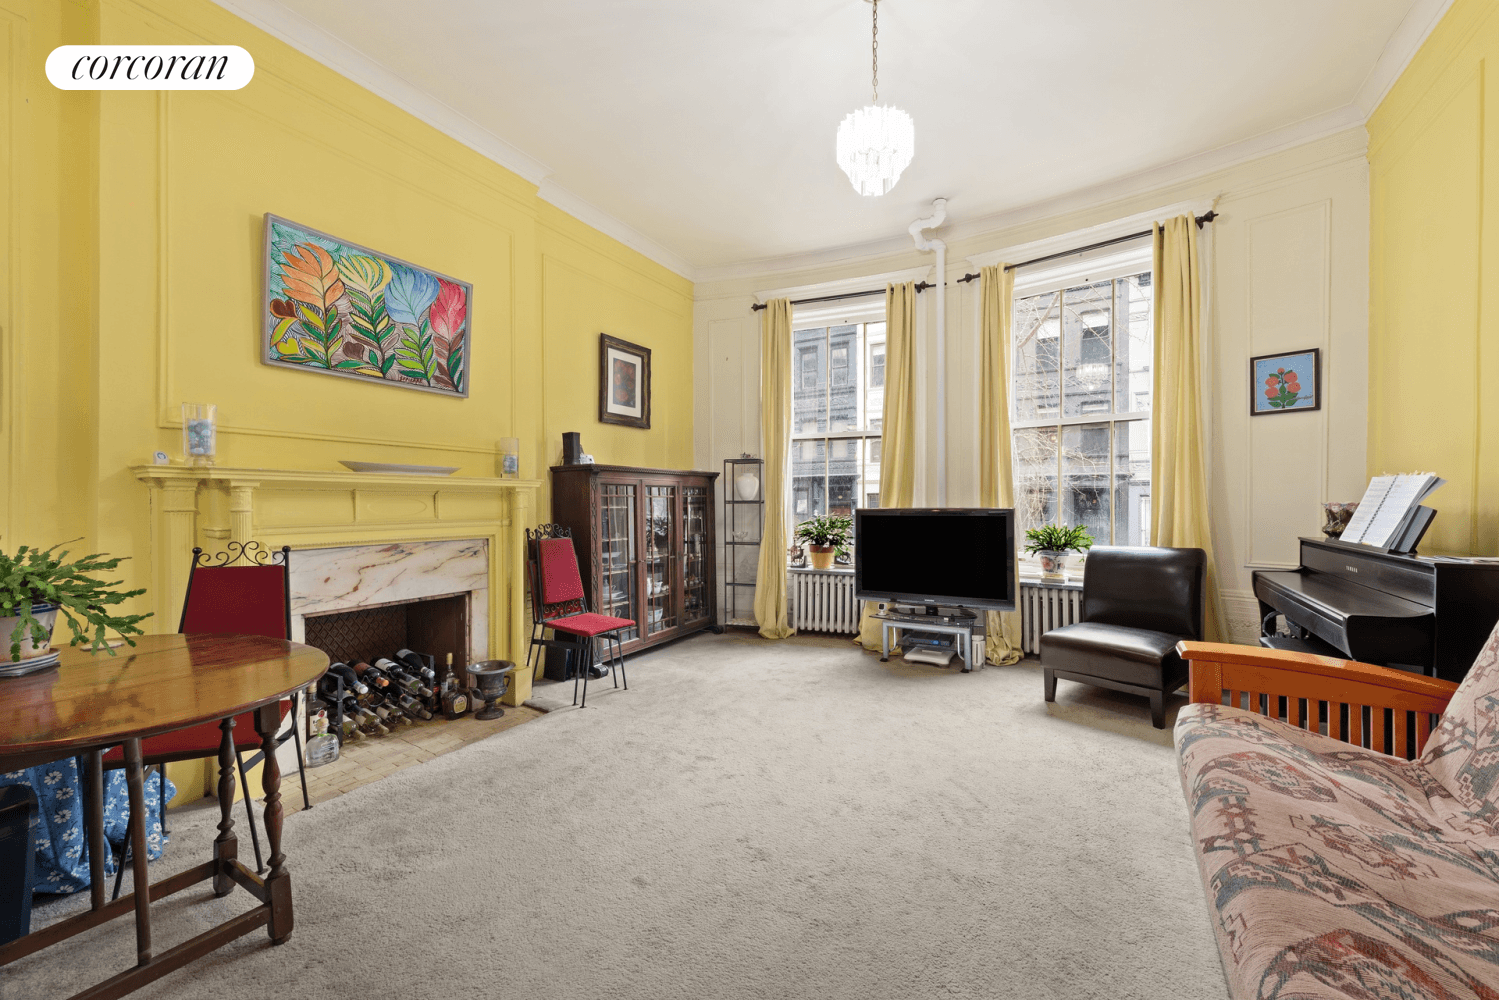 Price Just Reduced ! Beautifully maintained 9 unit Landmarked 1890 built townhouse on the Upper West Side can be delivered Fully Vacant with 5 finished floors.